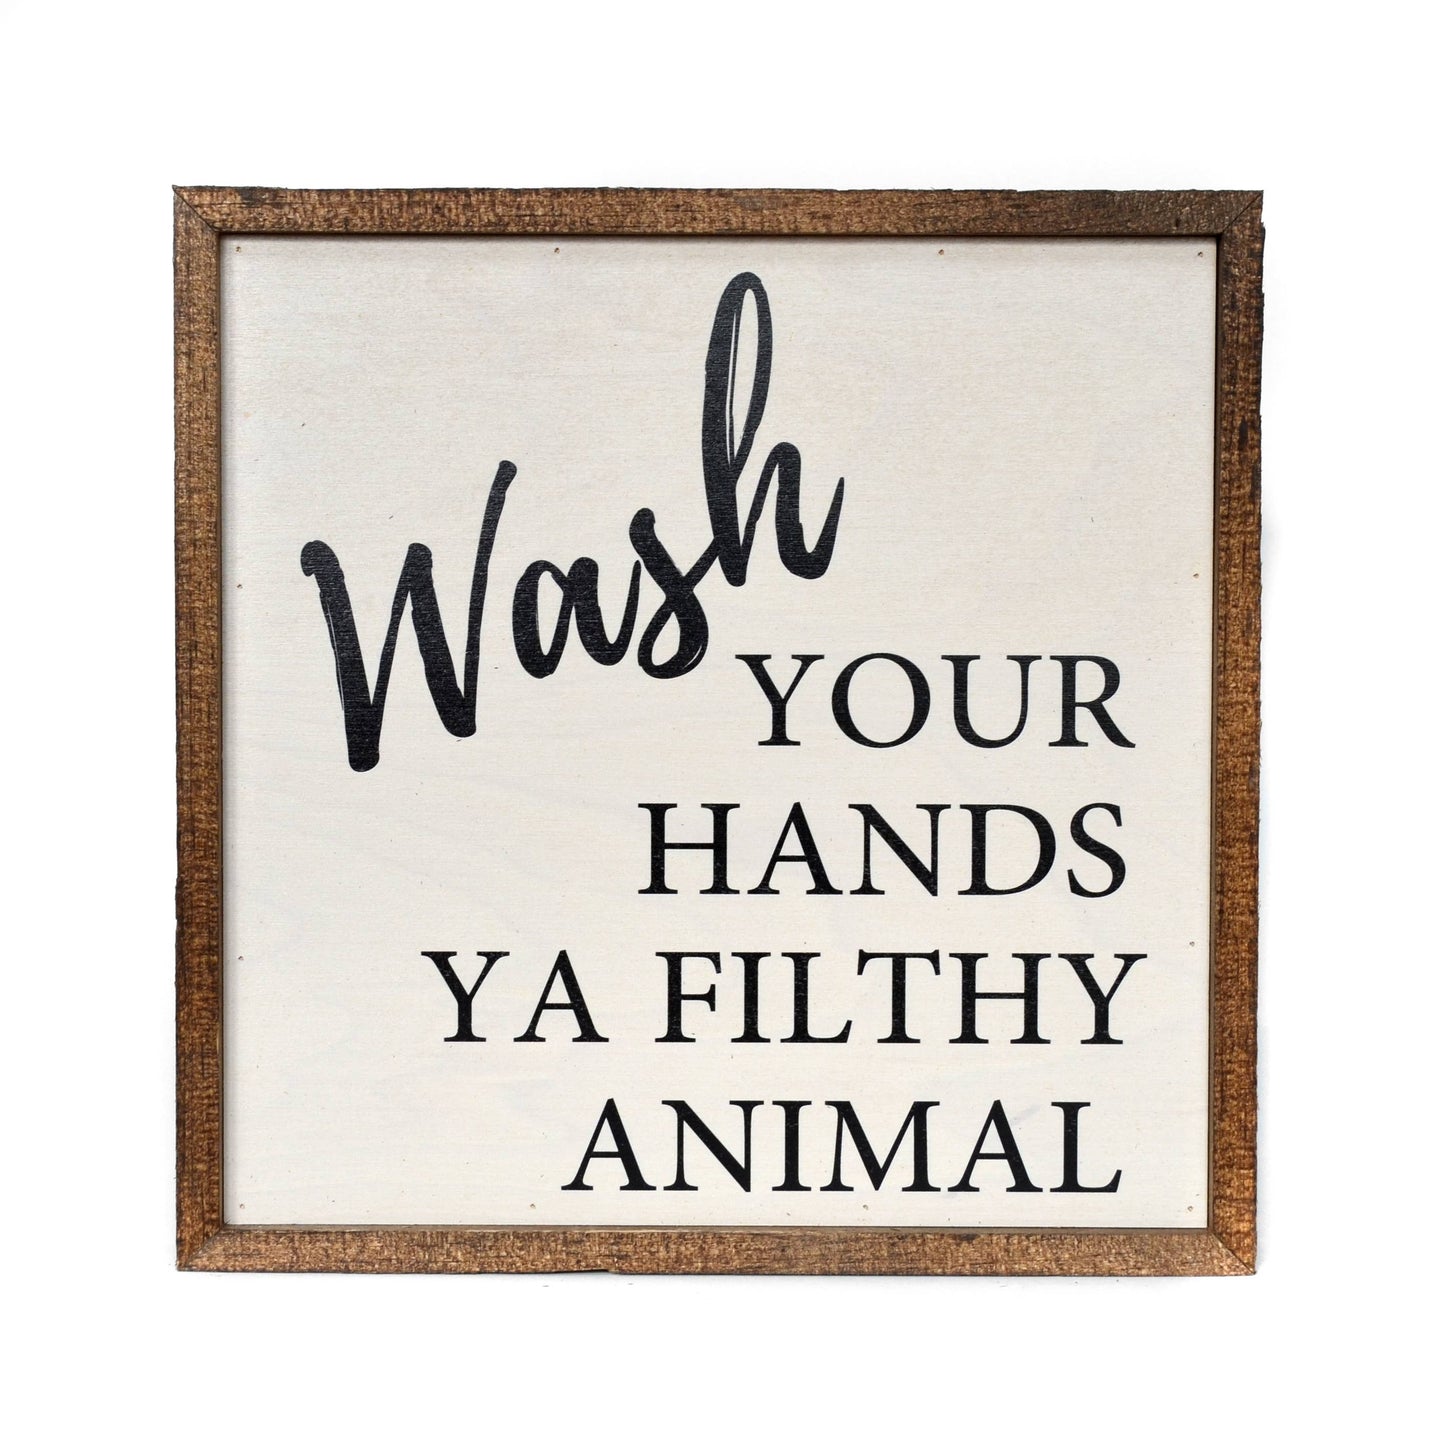 "Wash Your Hands Ya Filthy Animal" Wooden Sign